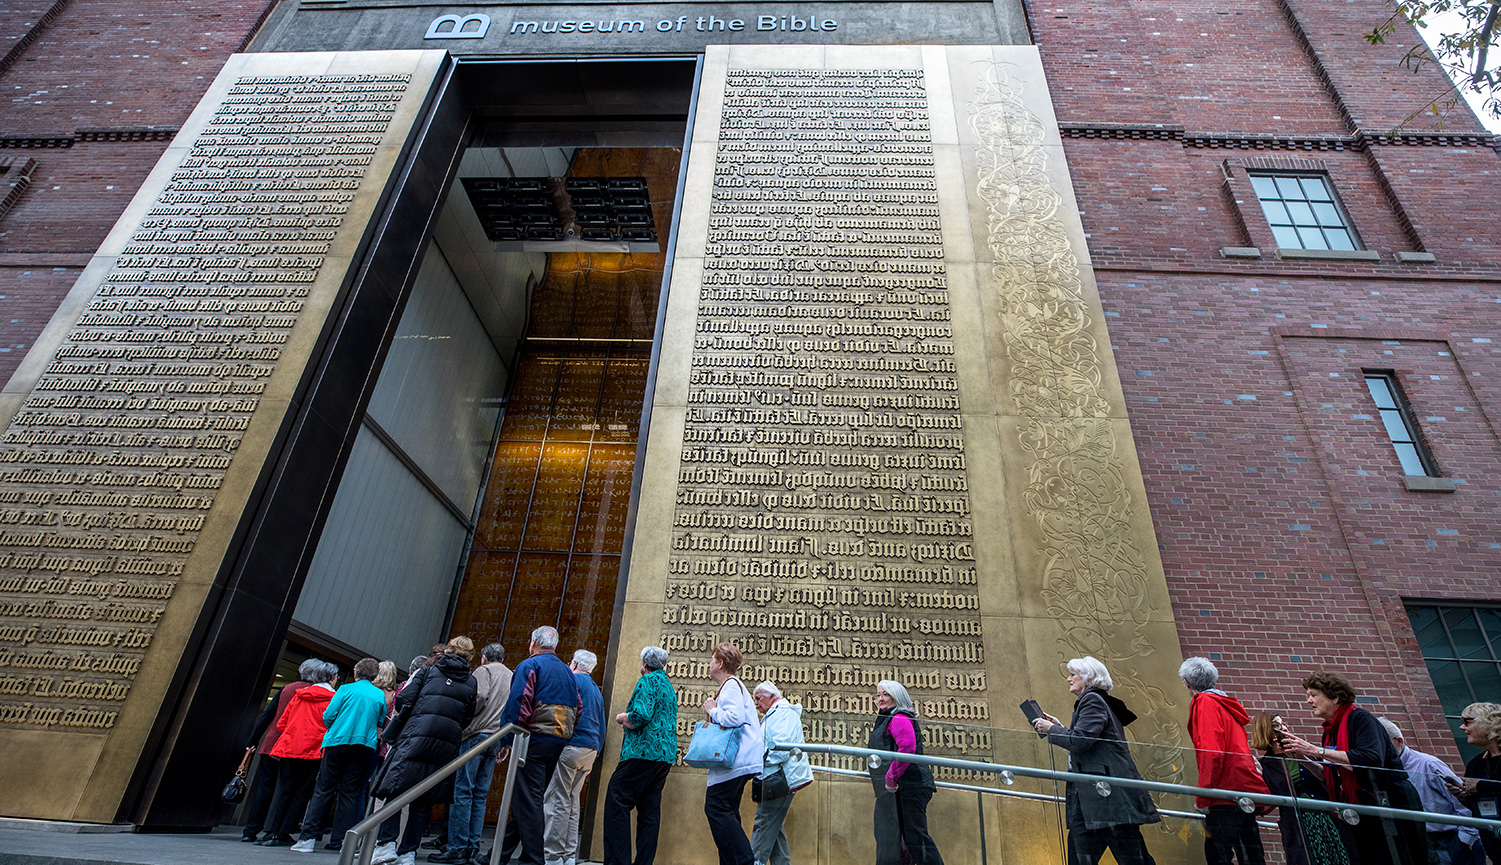 Tourists from Mississippi enter the Museum of the Bible in Washington, D.C. on December 5, 2017. Evelyn Hockstein/For the Washington Post via Getty Images.
